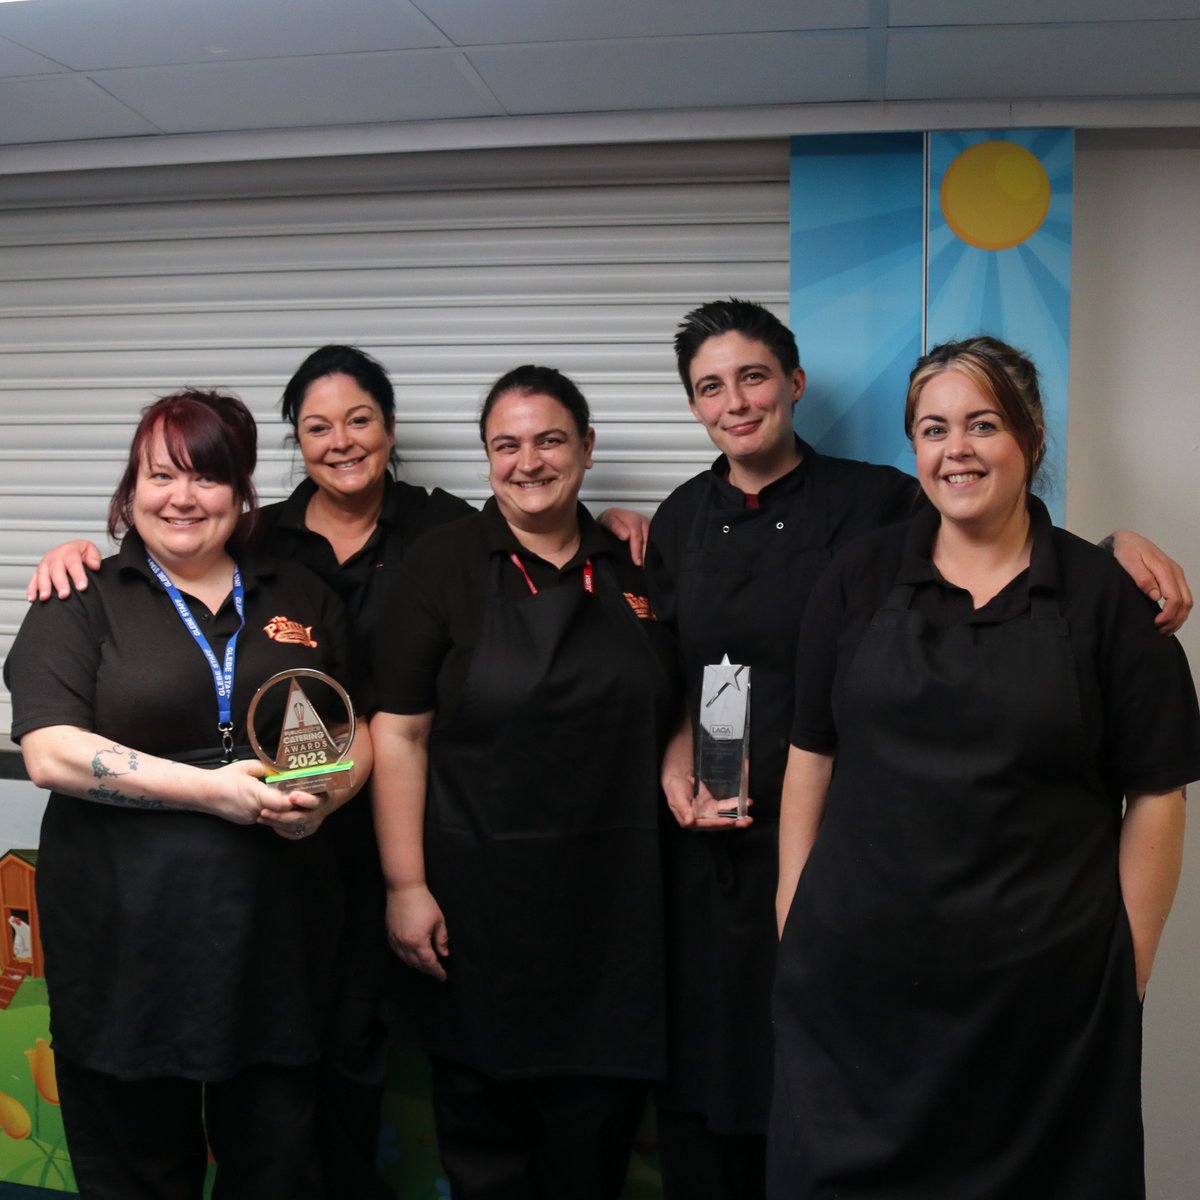 A day in the life of The Pantry at Glebe Primary School! Scroll to see how the day unfolded with healthy balanced diet sessions, lunchtime chats, and our hardworking kitchen team! #dreamworkmakesteamwork #Thepantry #schoolmeals